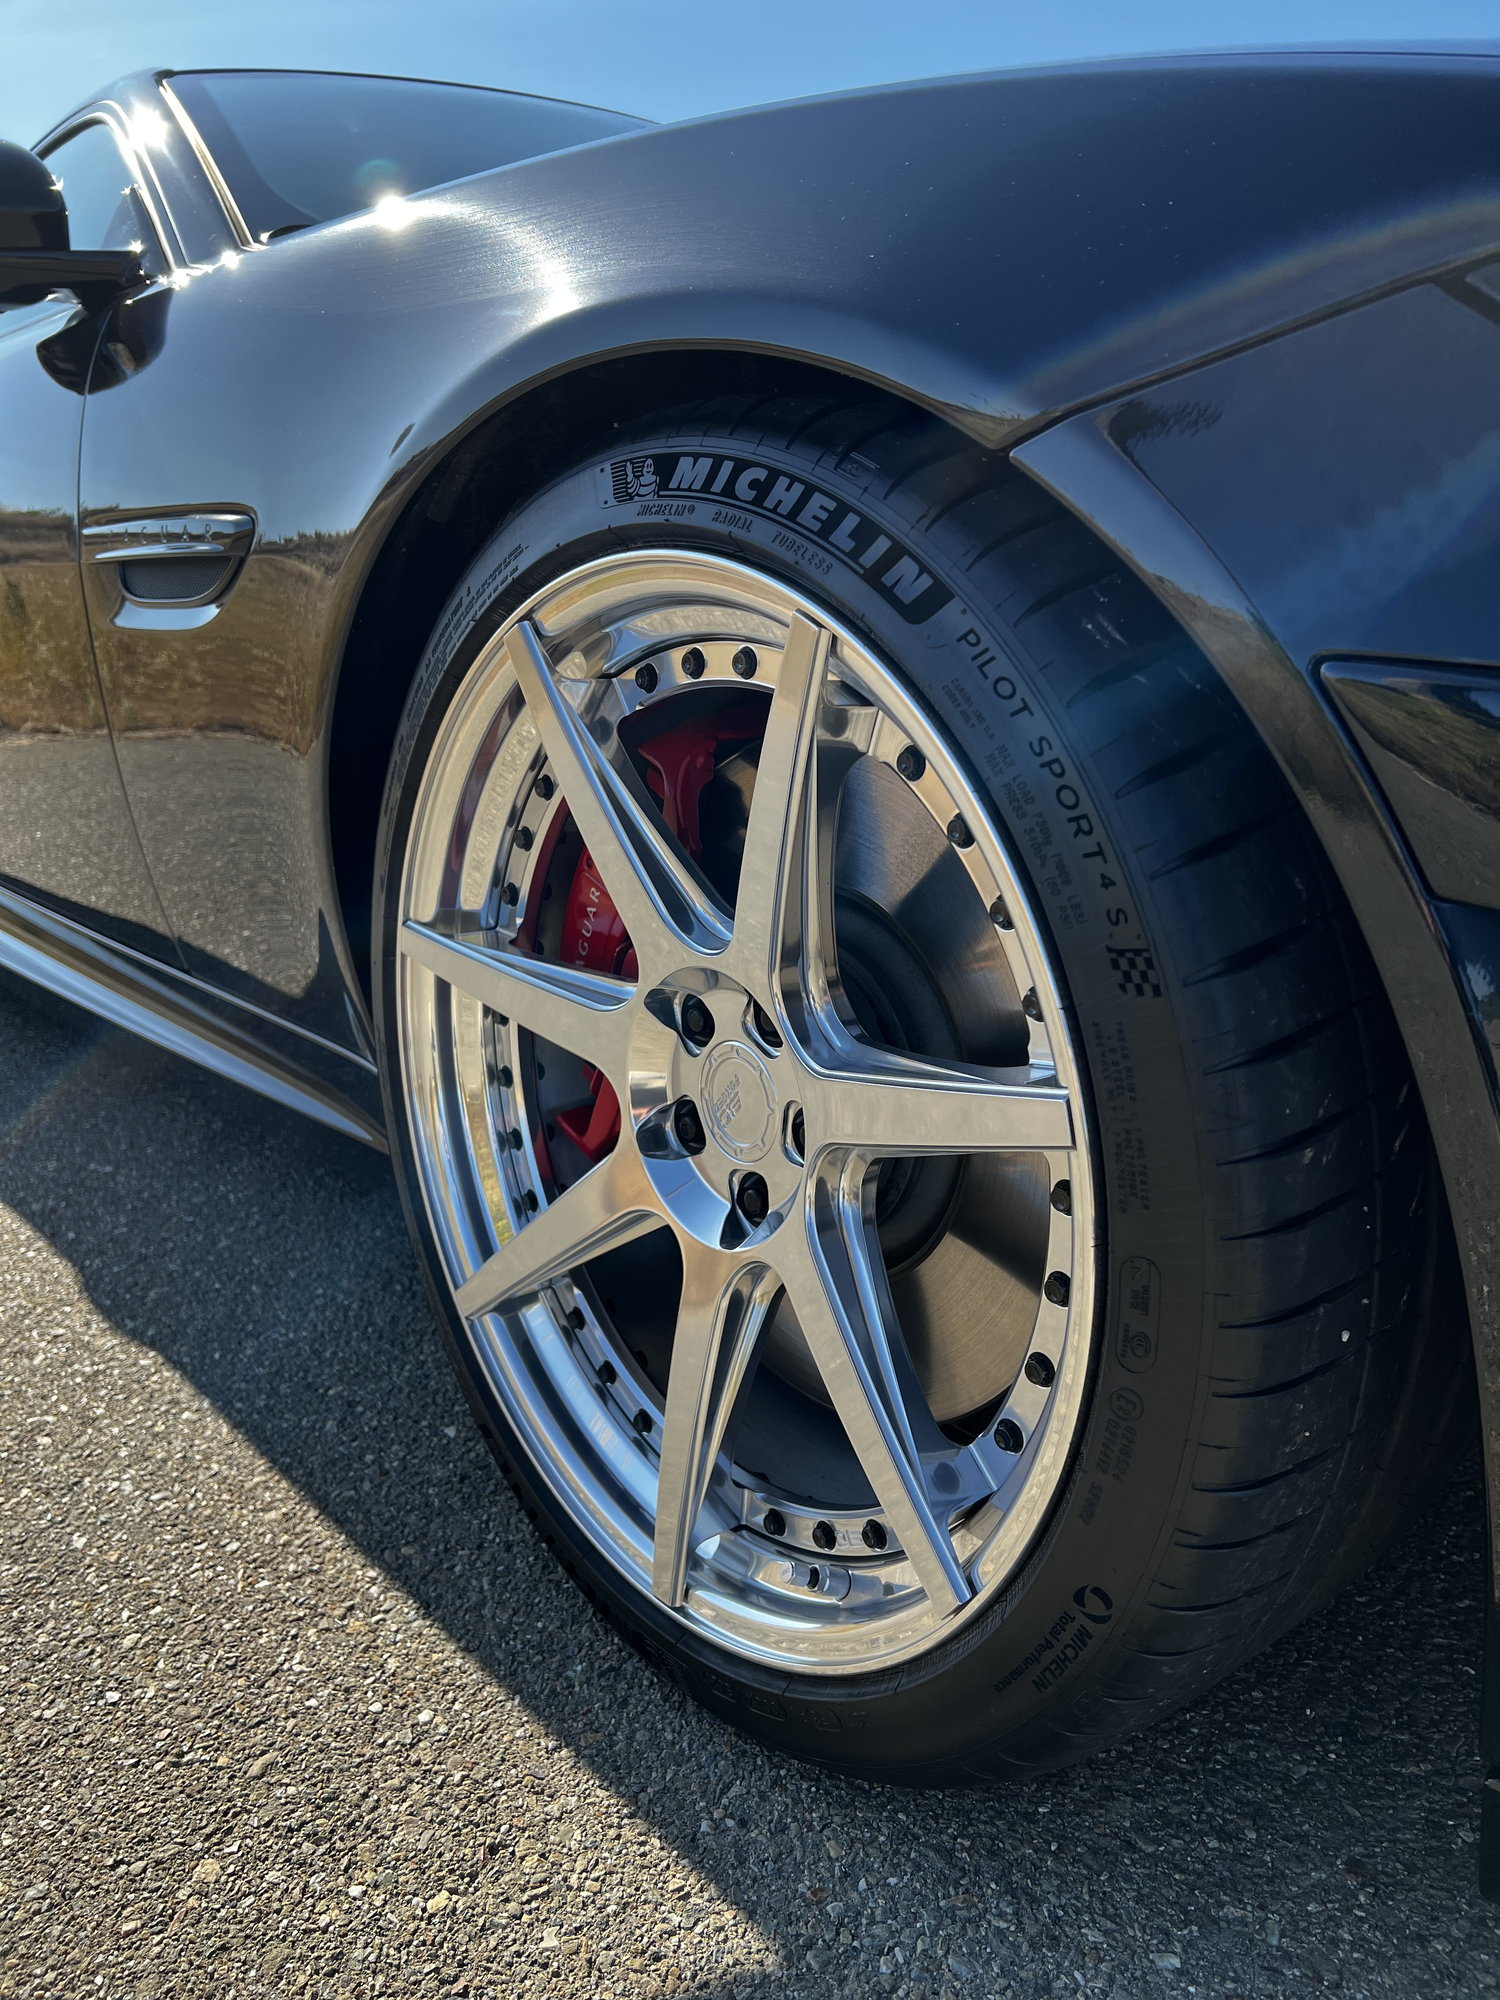 Wheels and Tires/Axles - [Like New] Jaguar XKR/S BC Forged Wheels & Michelin Pilot Sport 4S Tires - Used - 0  All Models - Pleasanton, CA 94566, United States